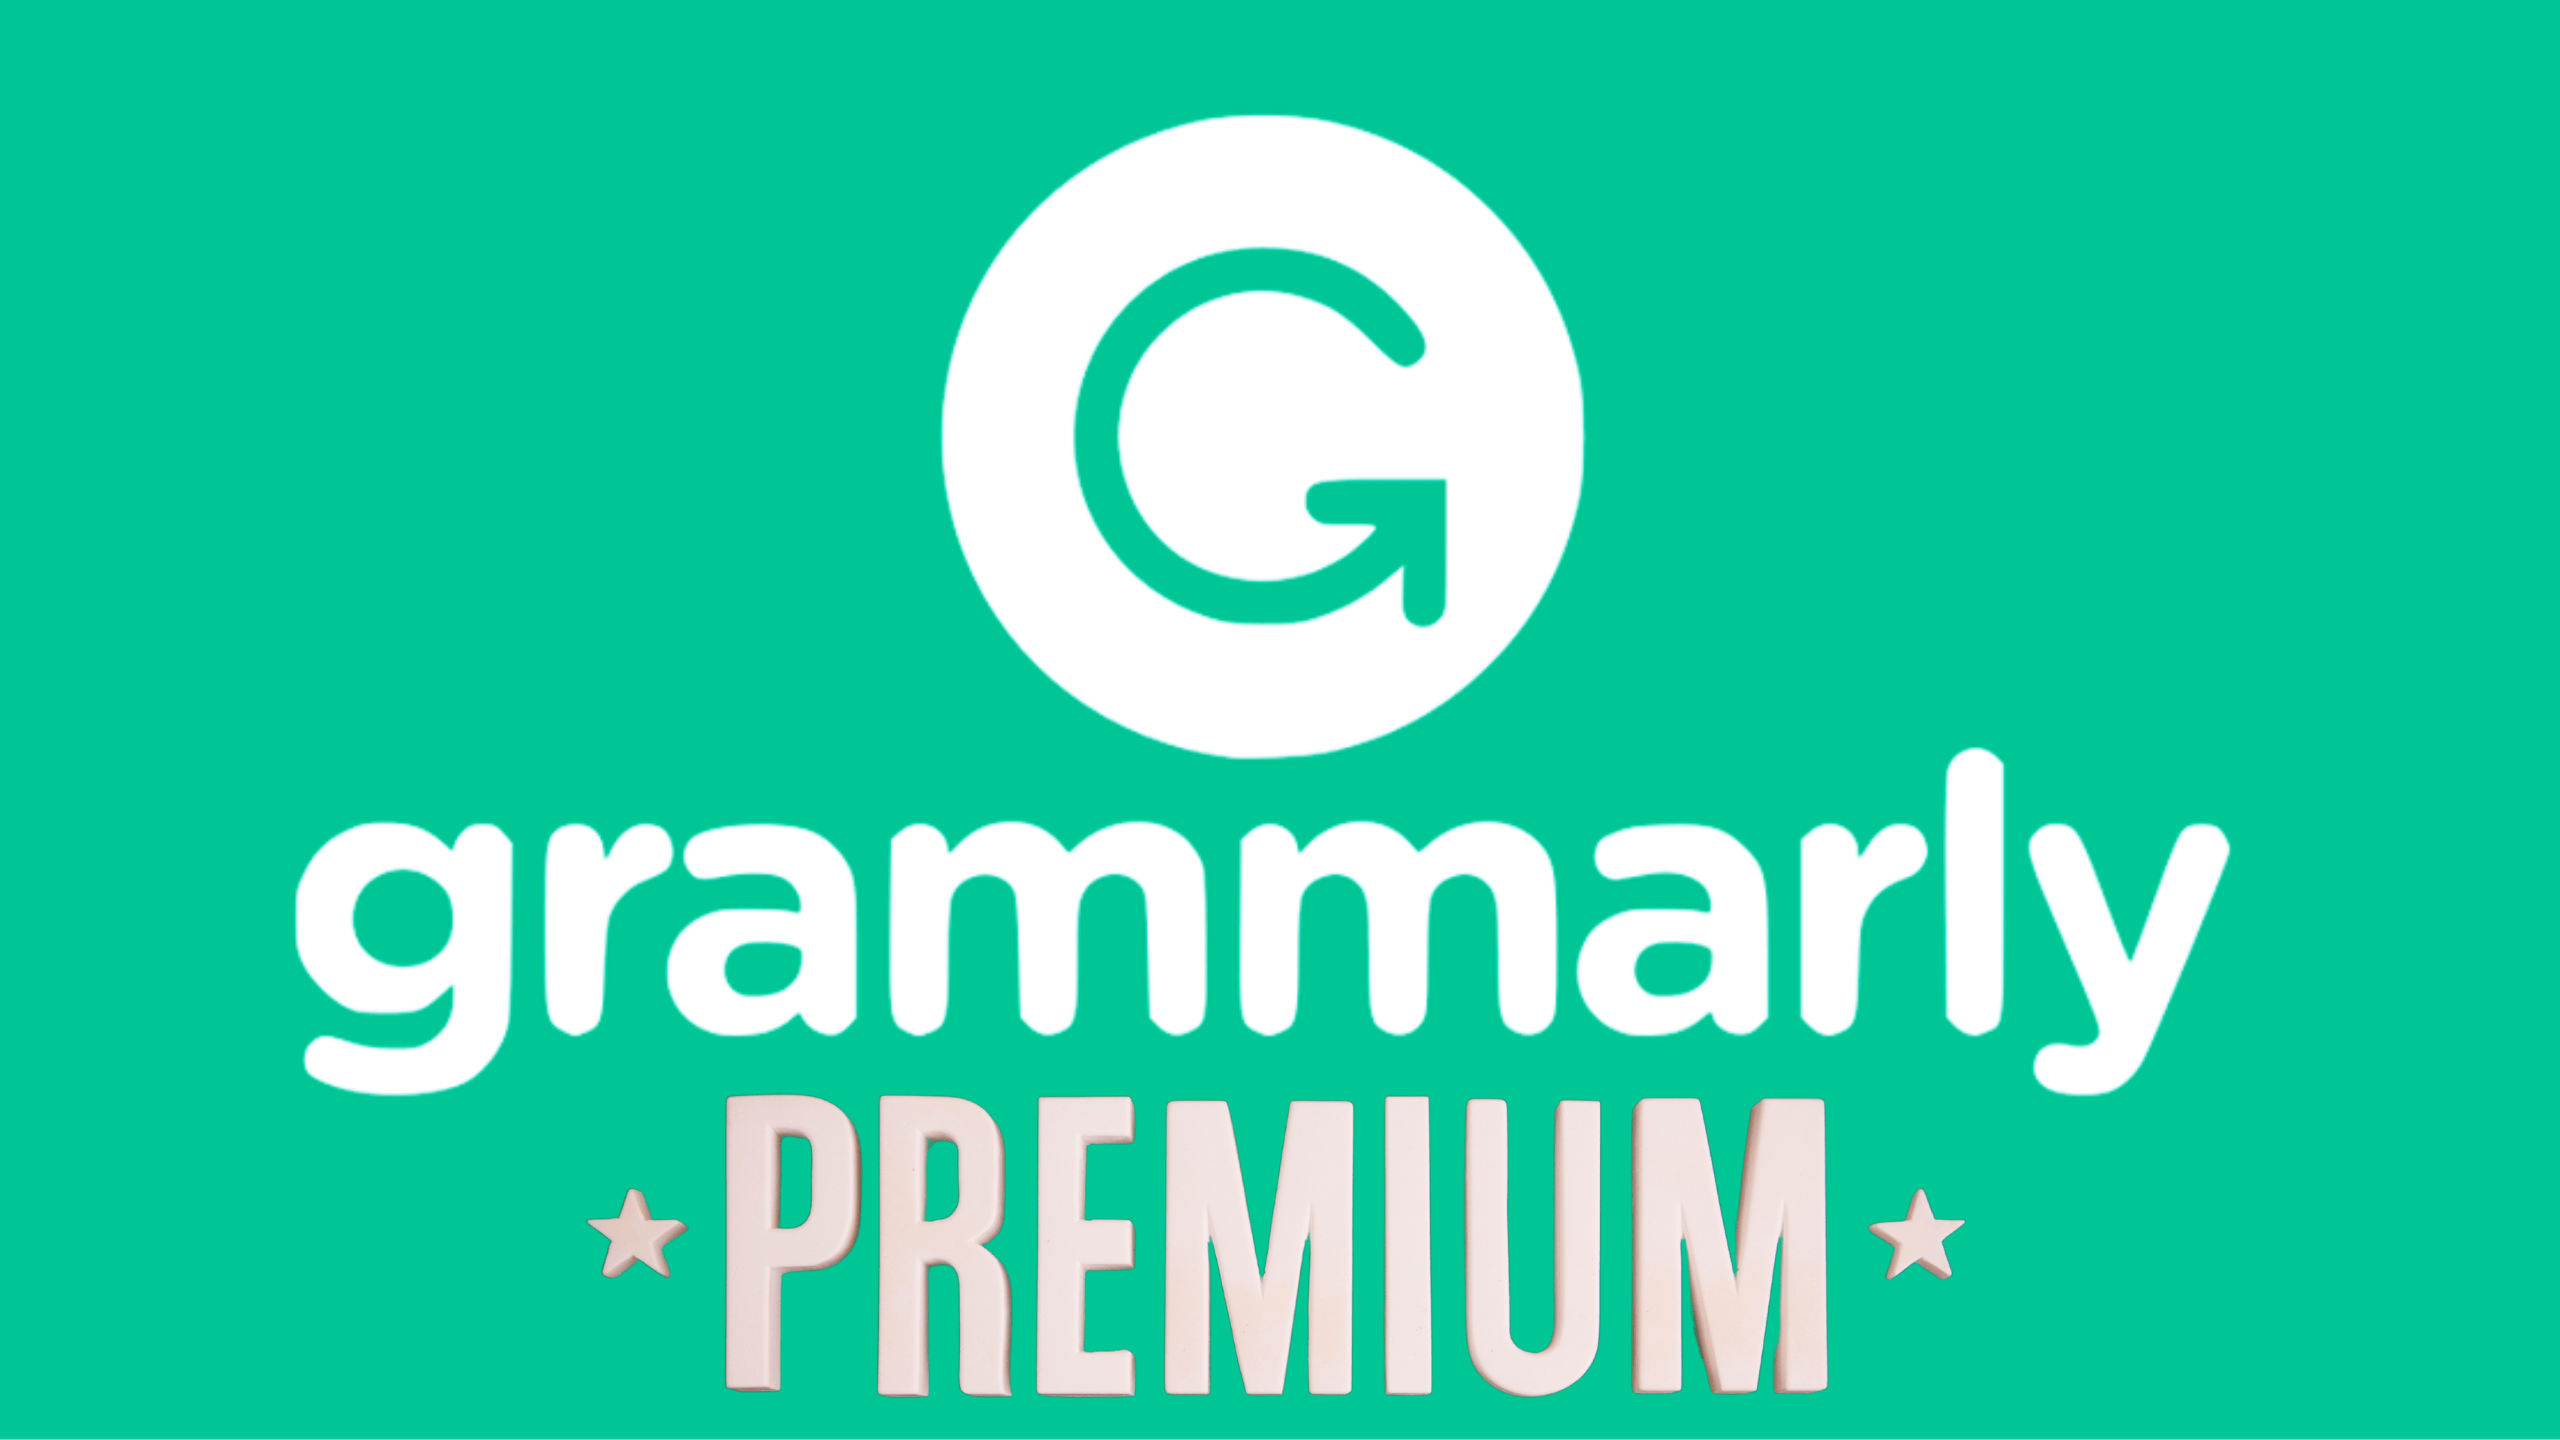 How To Get Grammarly Premium for Free in 2022